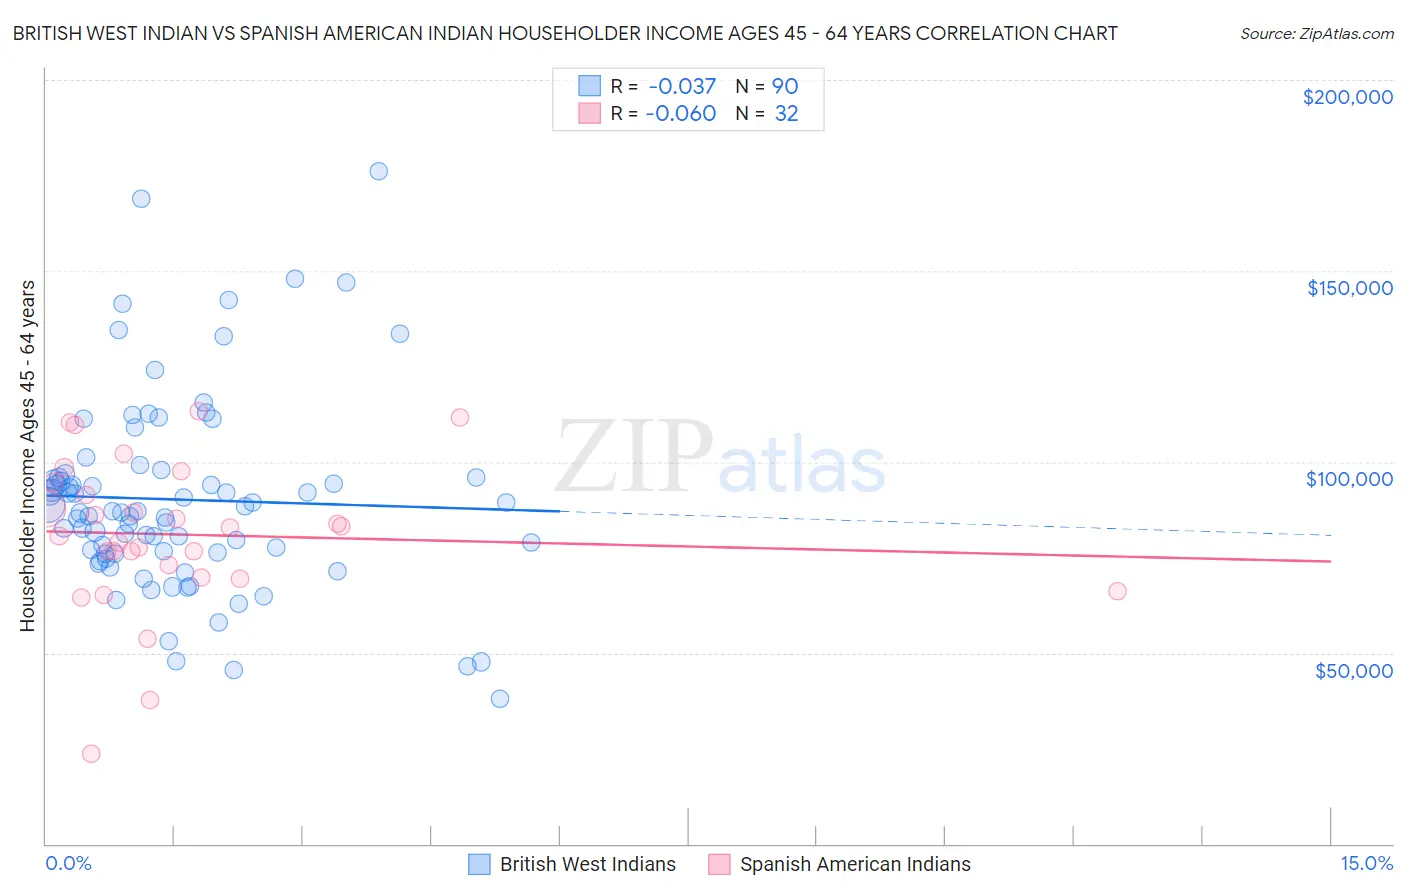 British West Indian vs Spanish American Indian Householder Income Ages 45 - 64 years